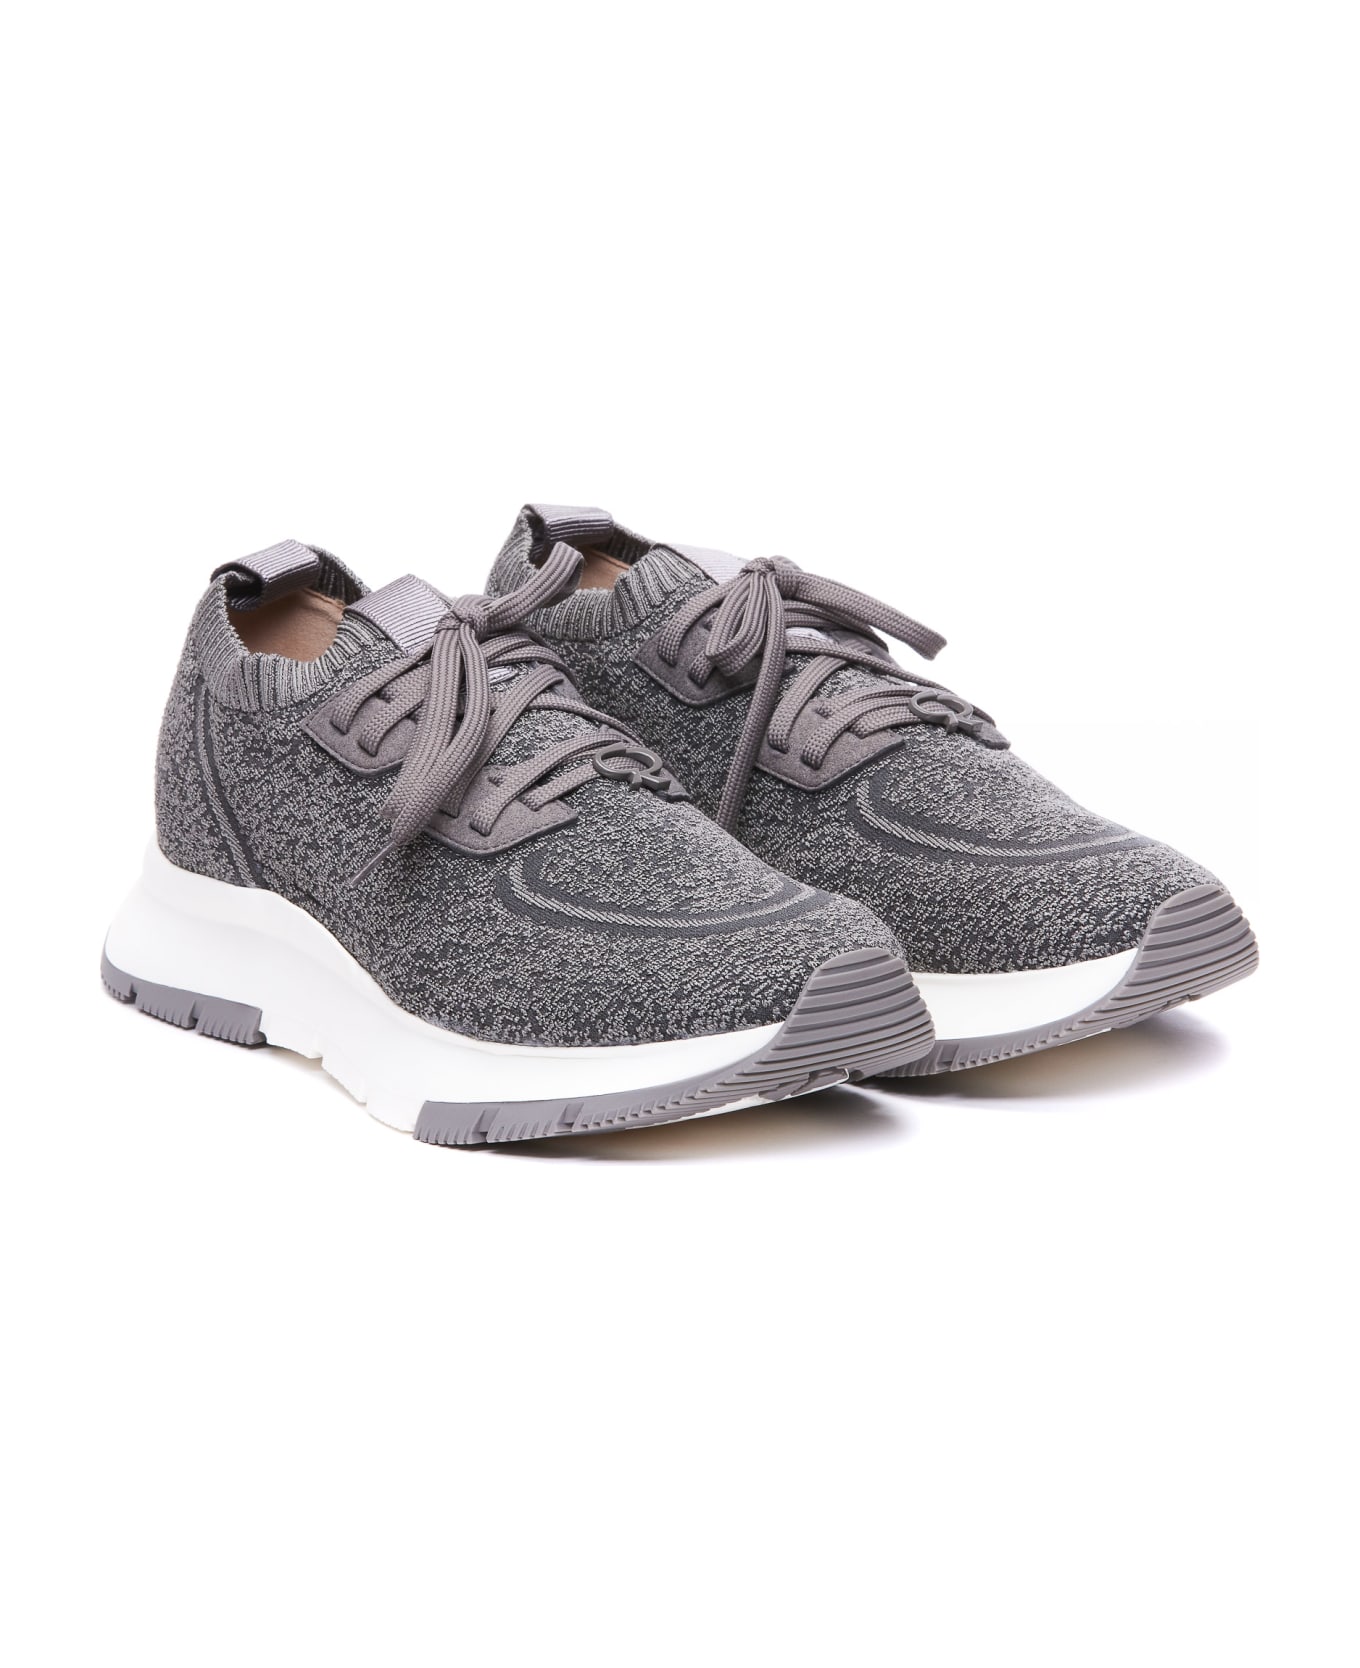 Gianvito Rossi Glover Sneakers - Grey スニーカー